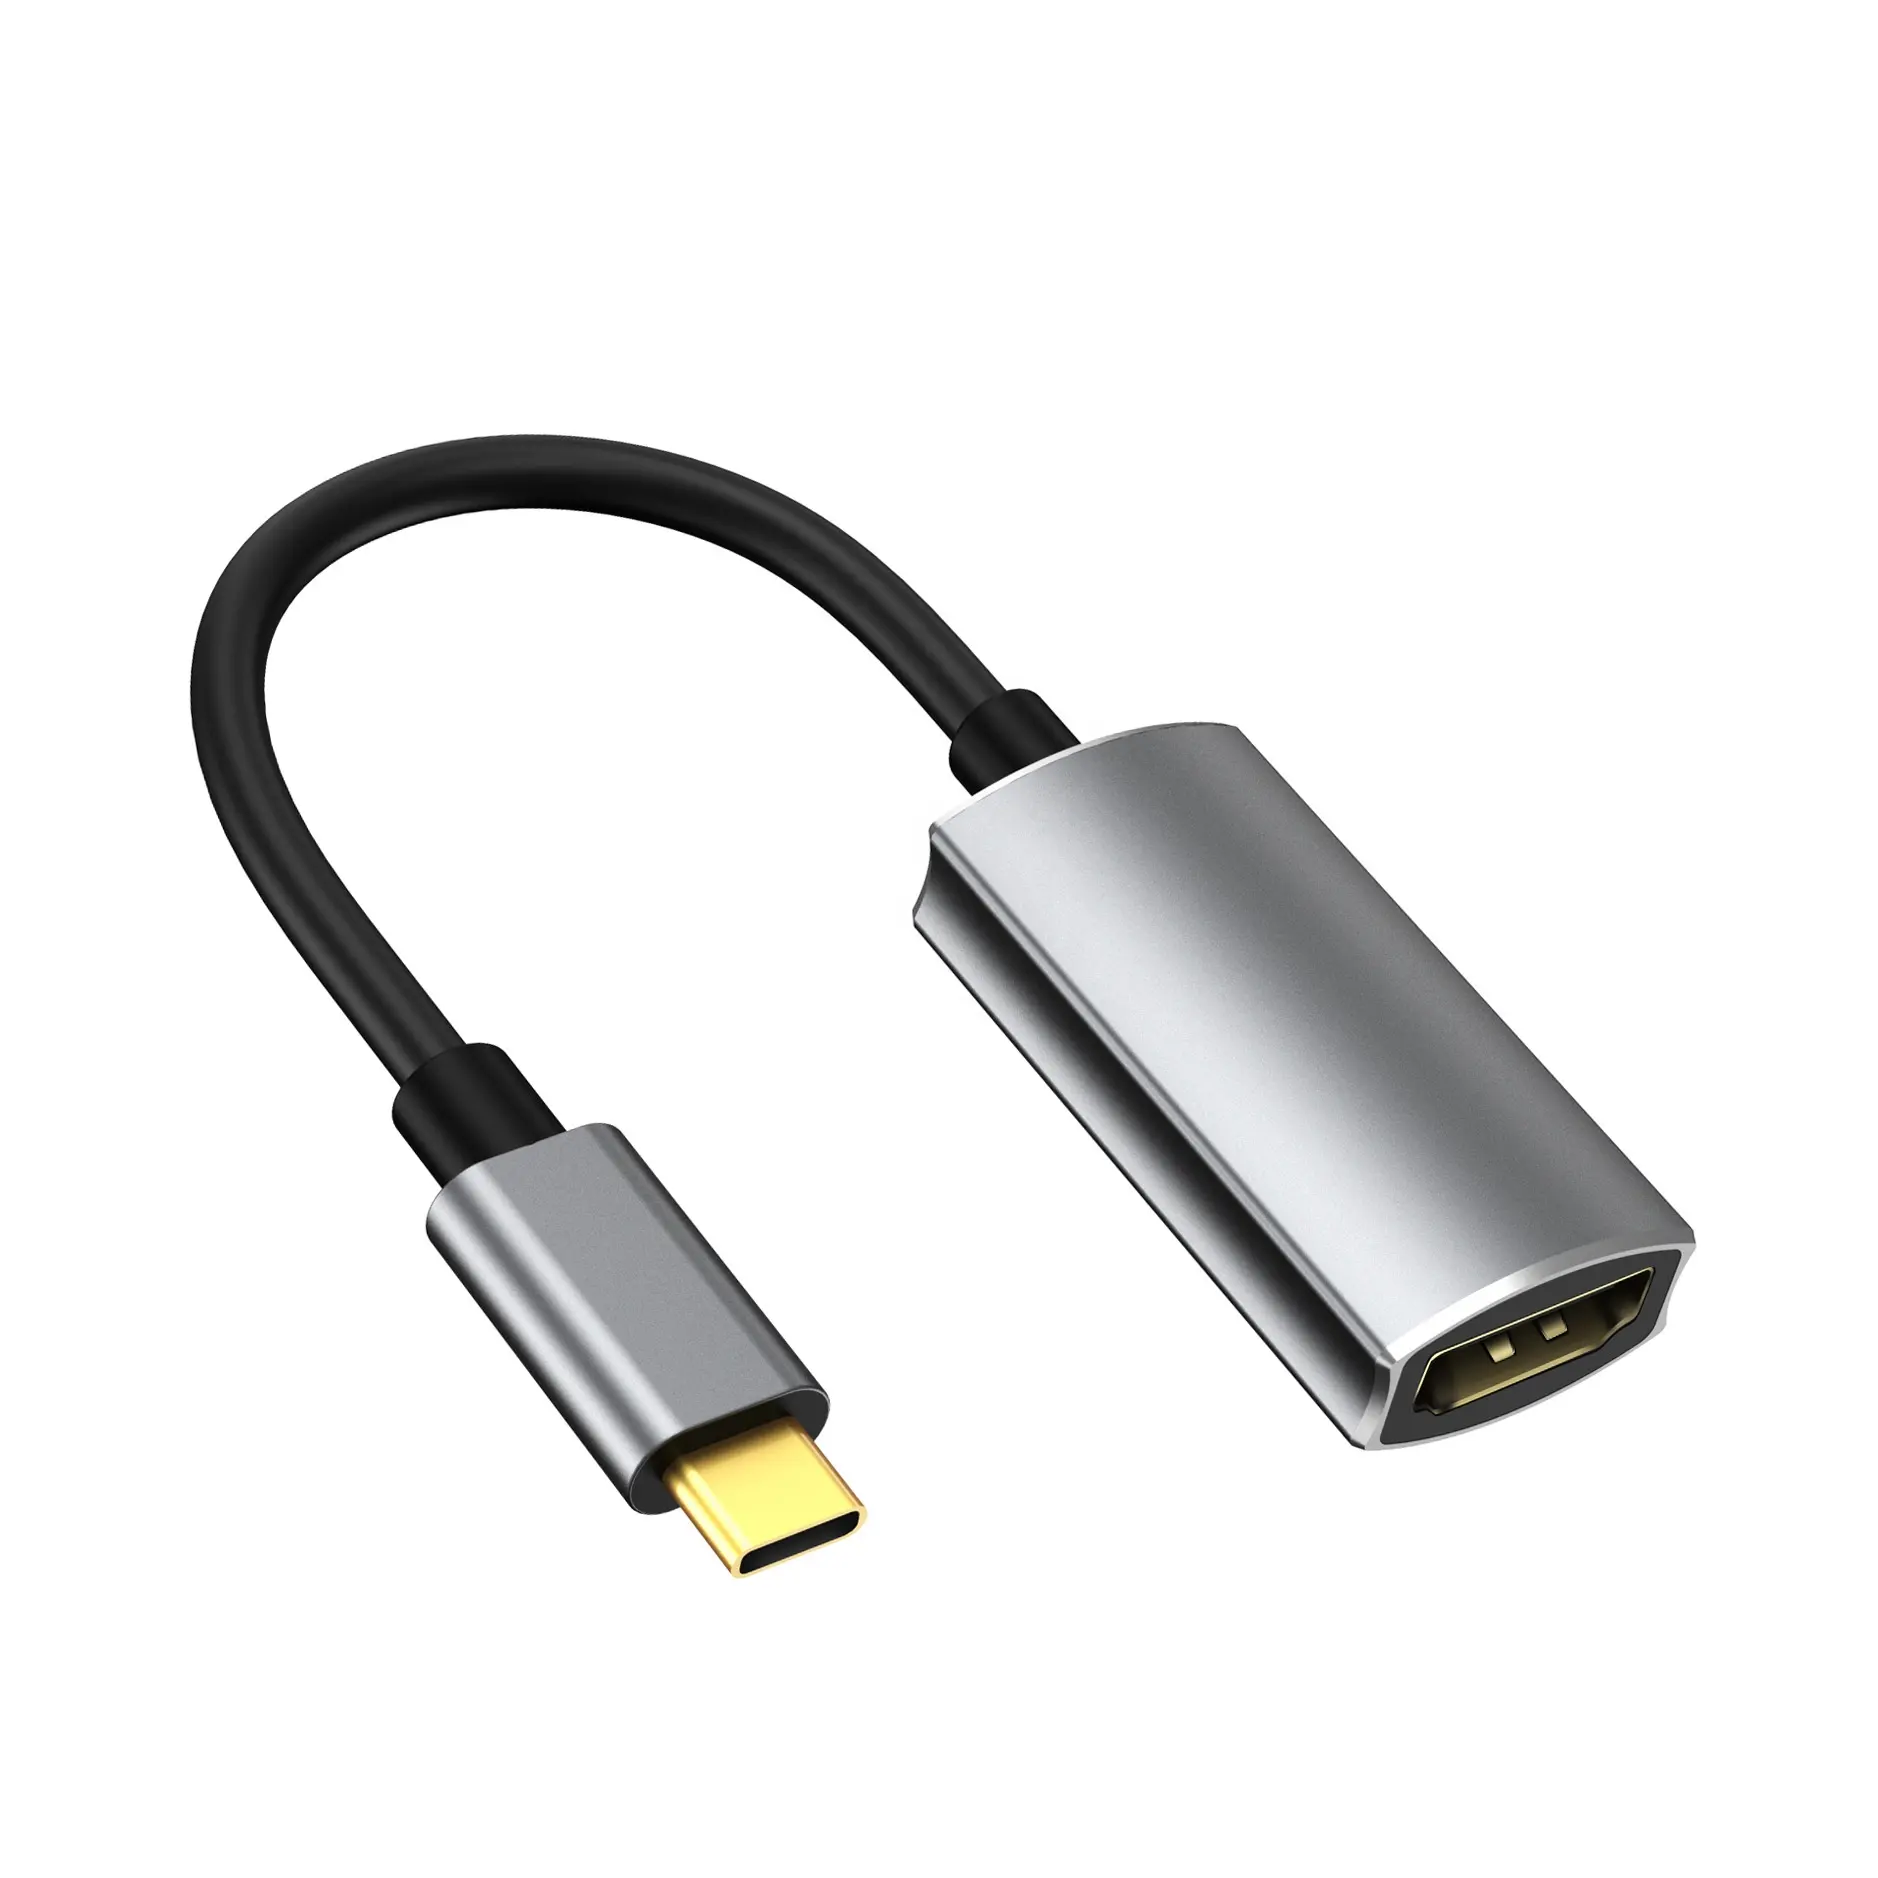 USB C to Video Audio AV HDMI Adapter for Macbook Pro and Samsung S8 S9 S10 and Huawei Matebook to HDTV and Projector and more